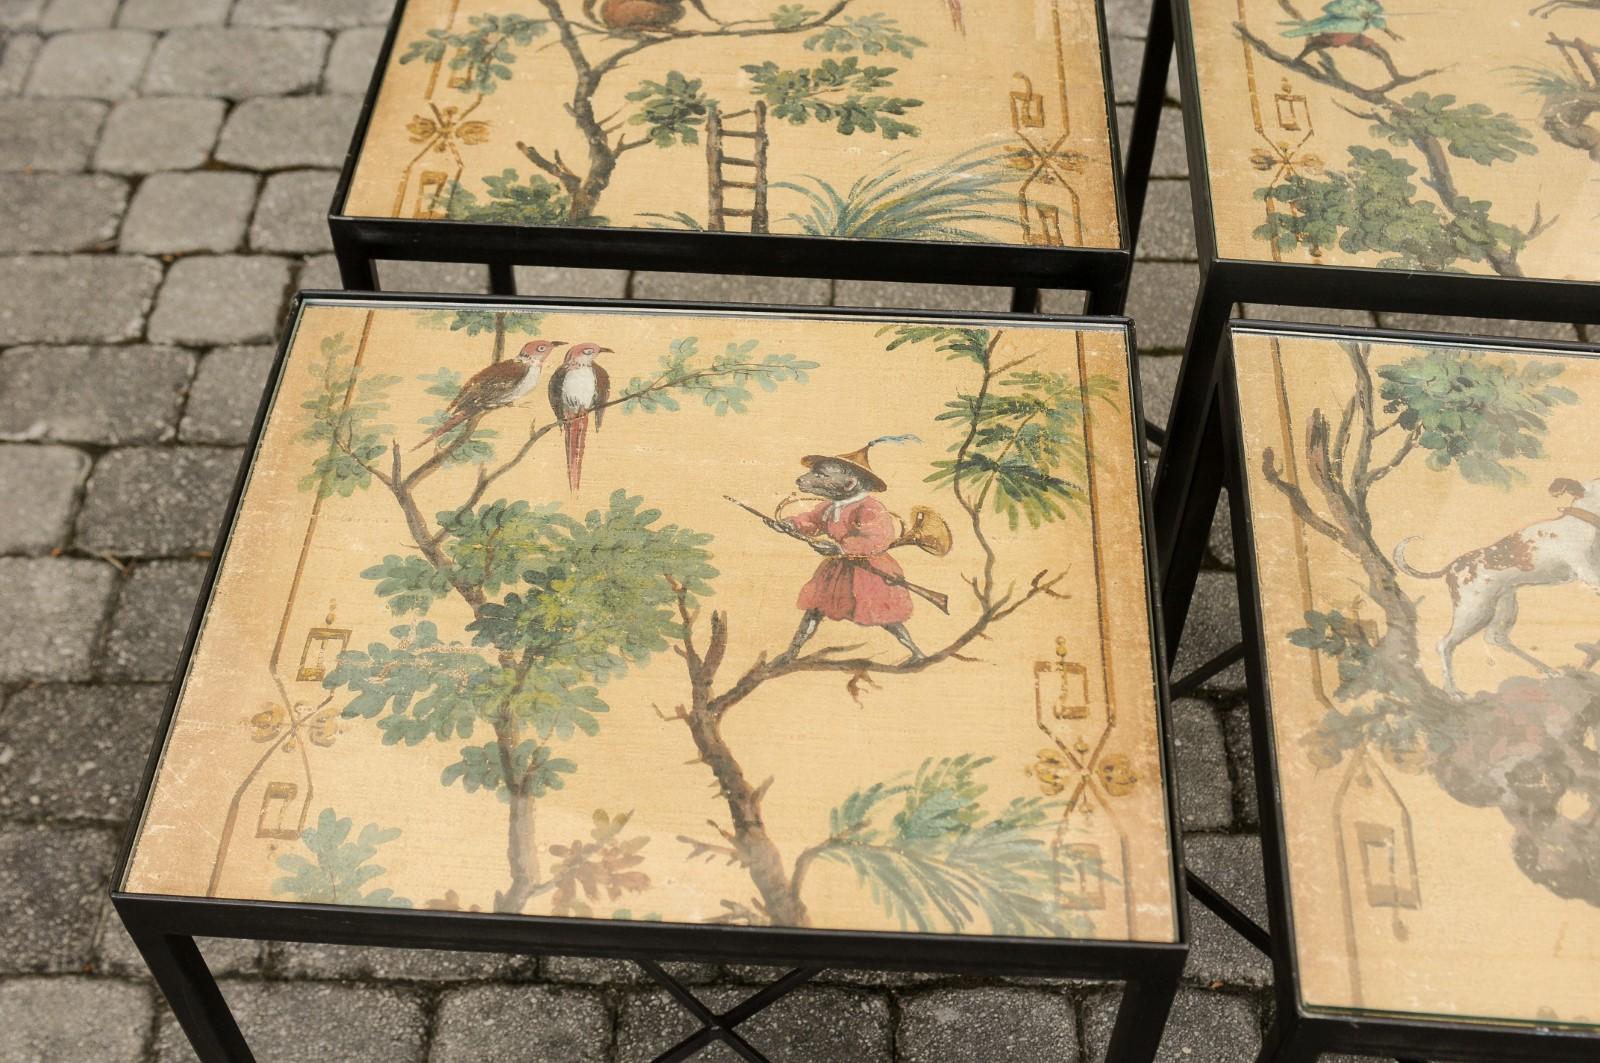 Glass Contemporary Chinoiserie Side Table with Monkey and Birds Motifs on Iron Base